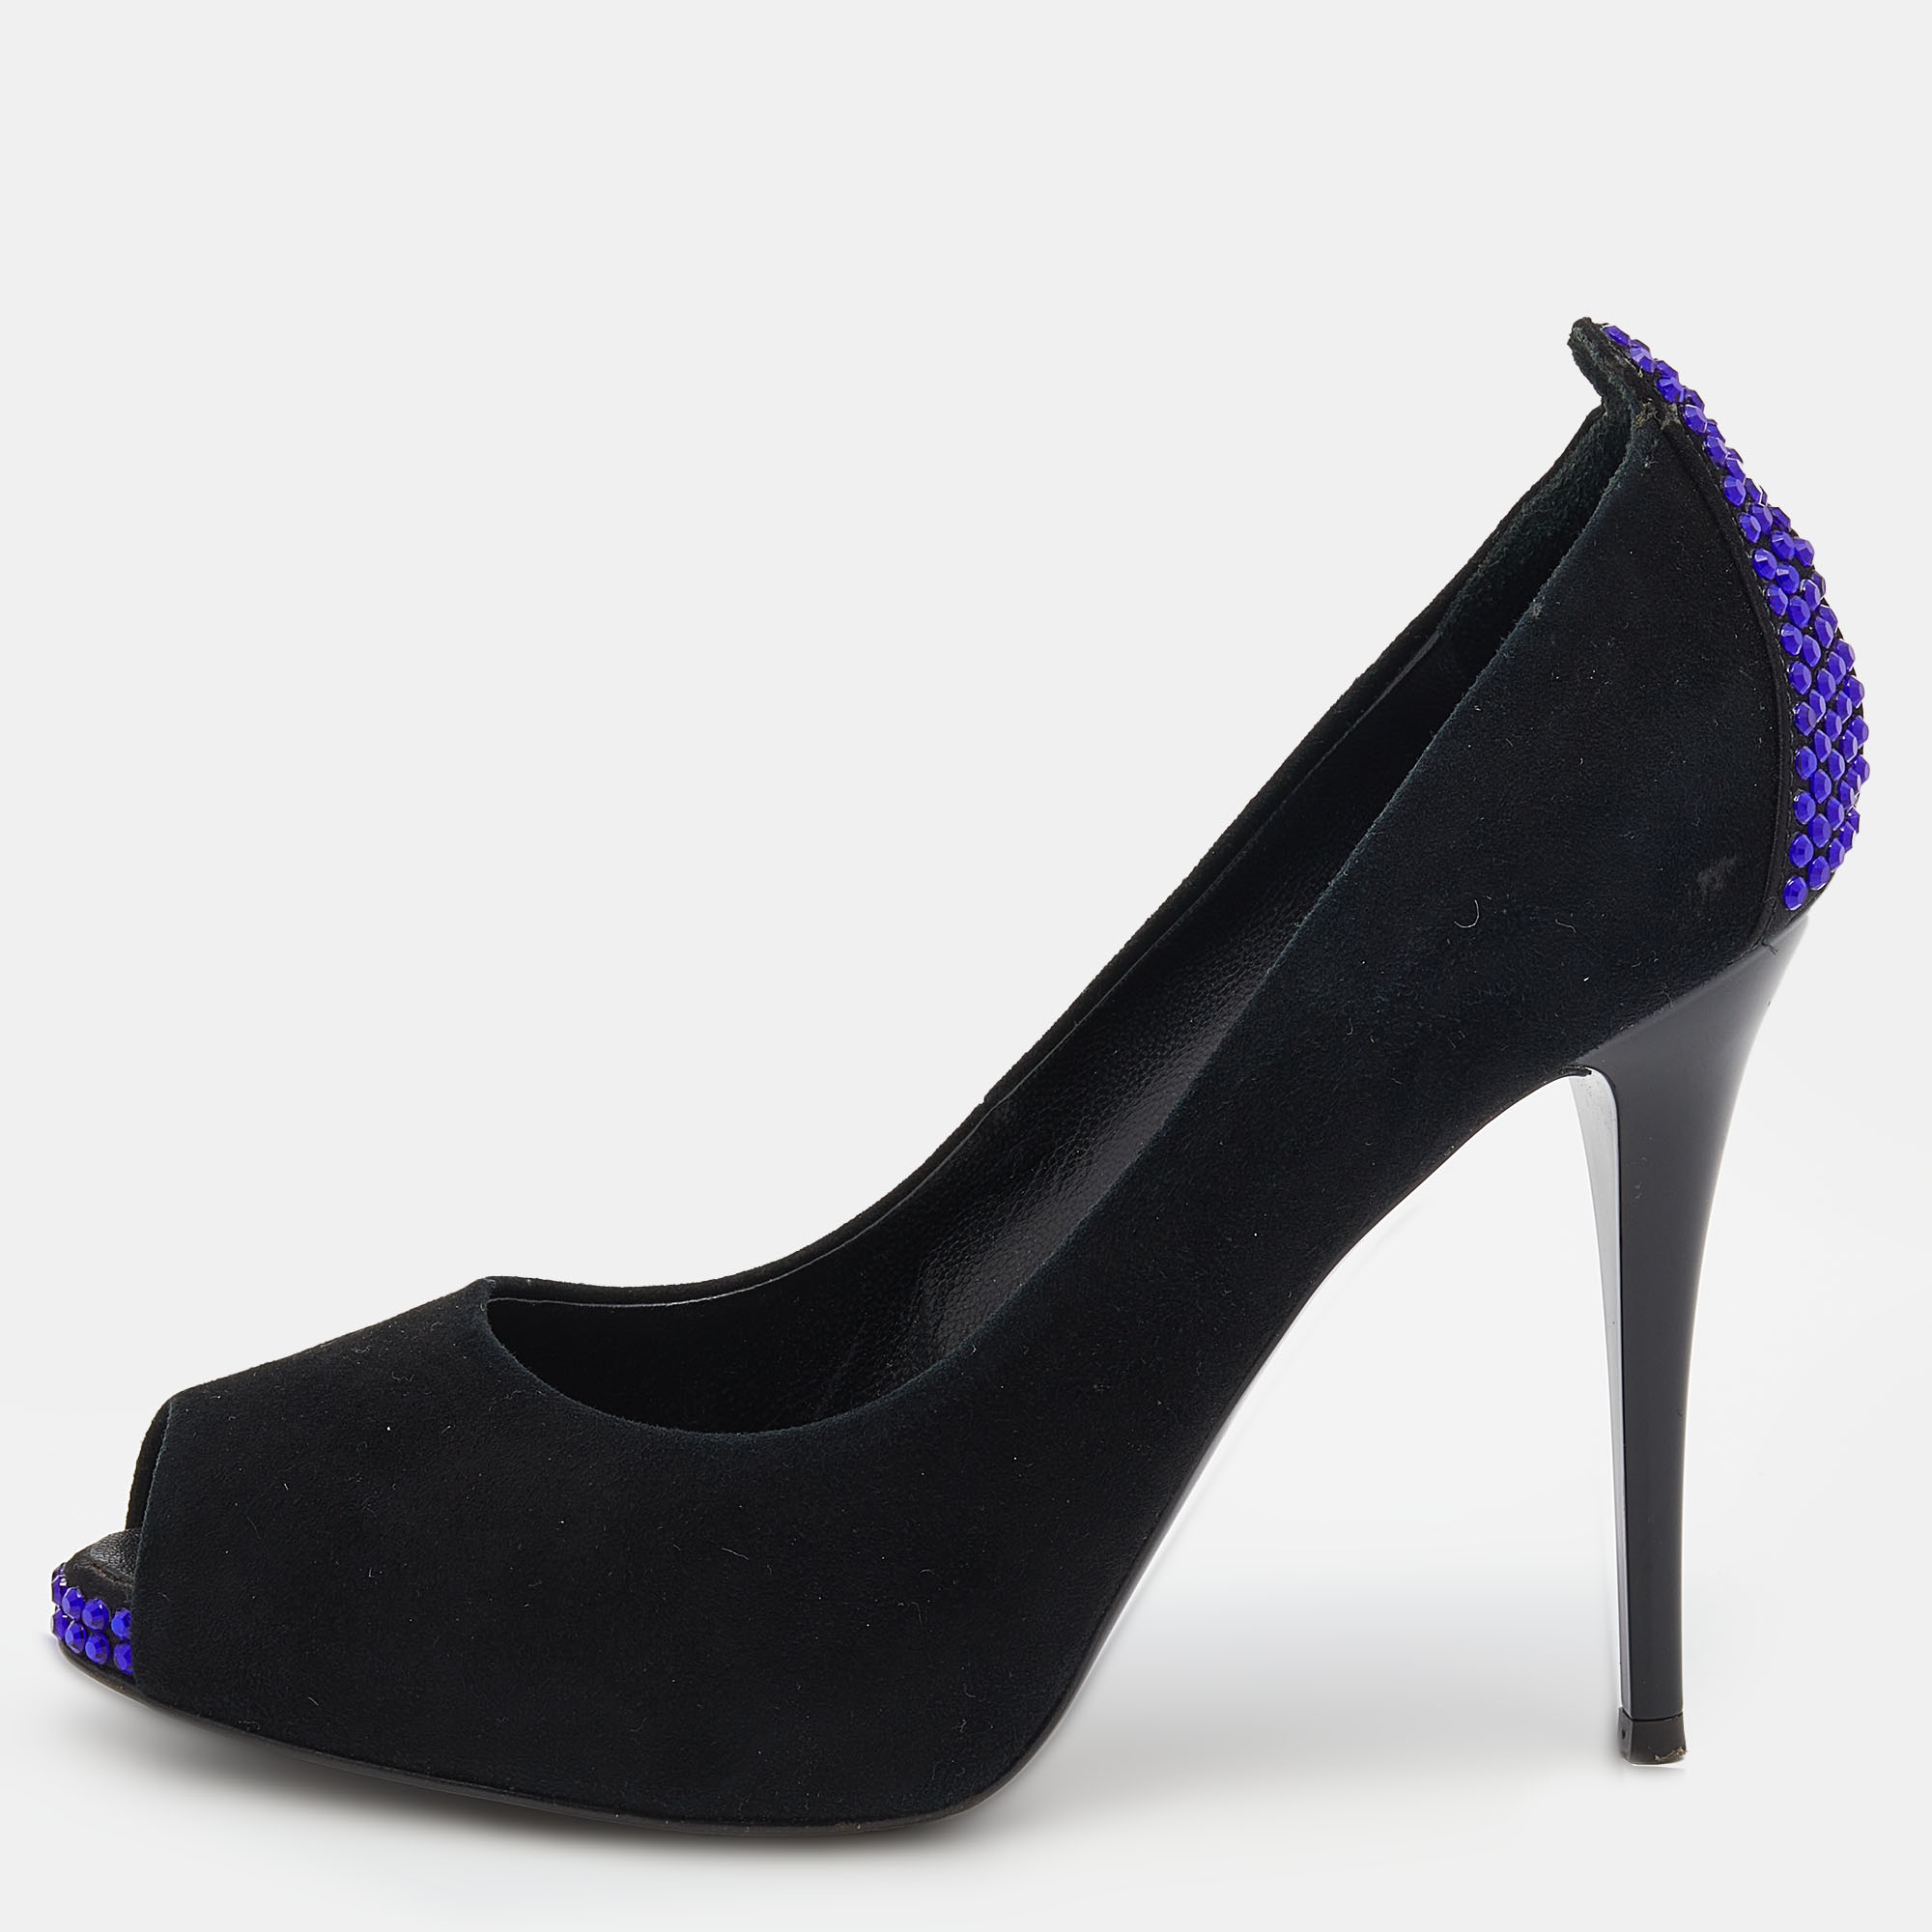 These curvaceous Giuseppe Zanotti pumps are a timeless wardrobe staple. Crafted from luxurious material they feature well lined insoles that offer endless comfort.